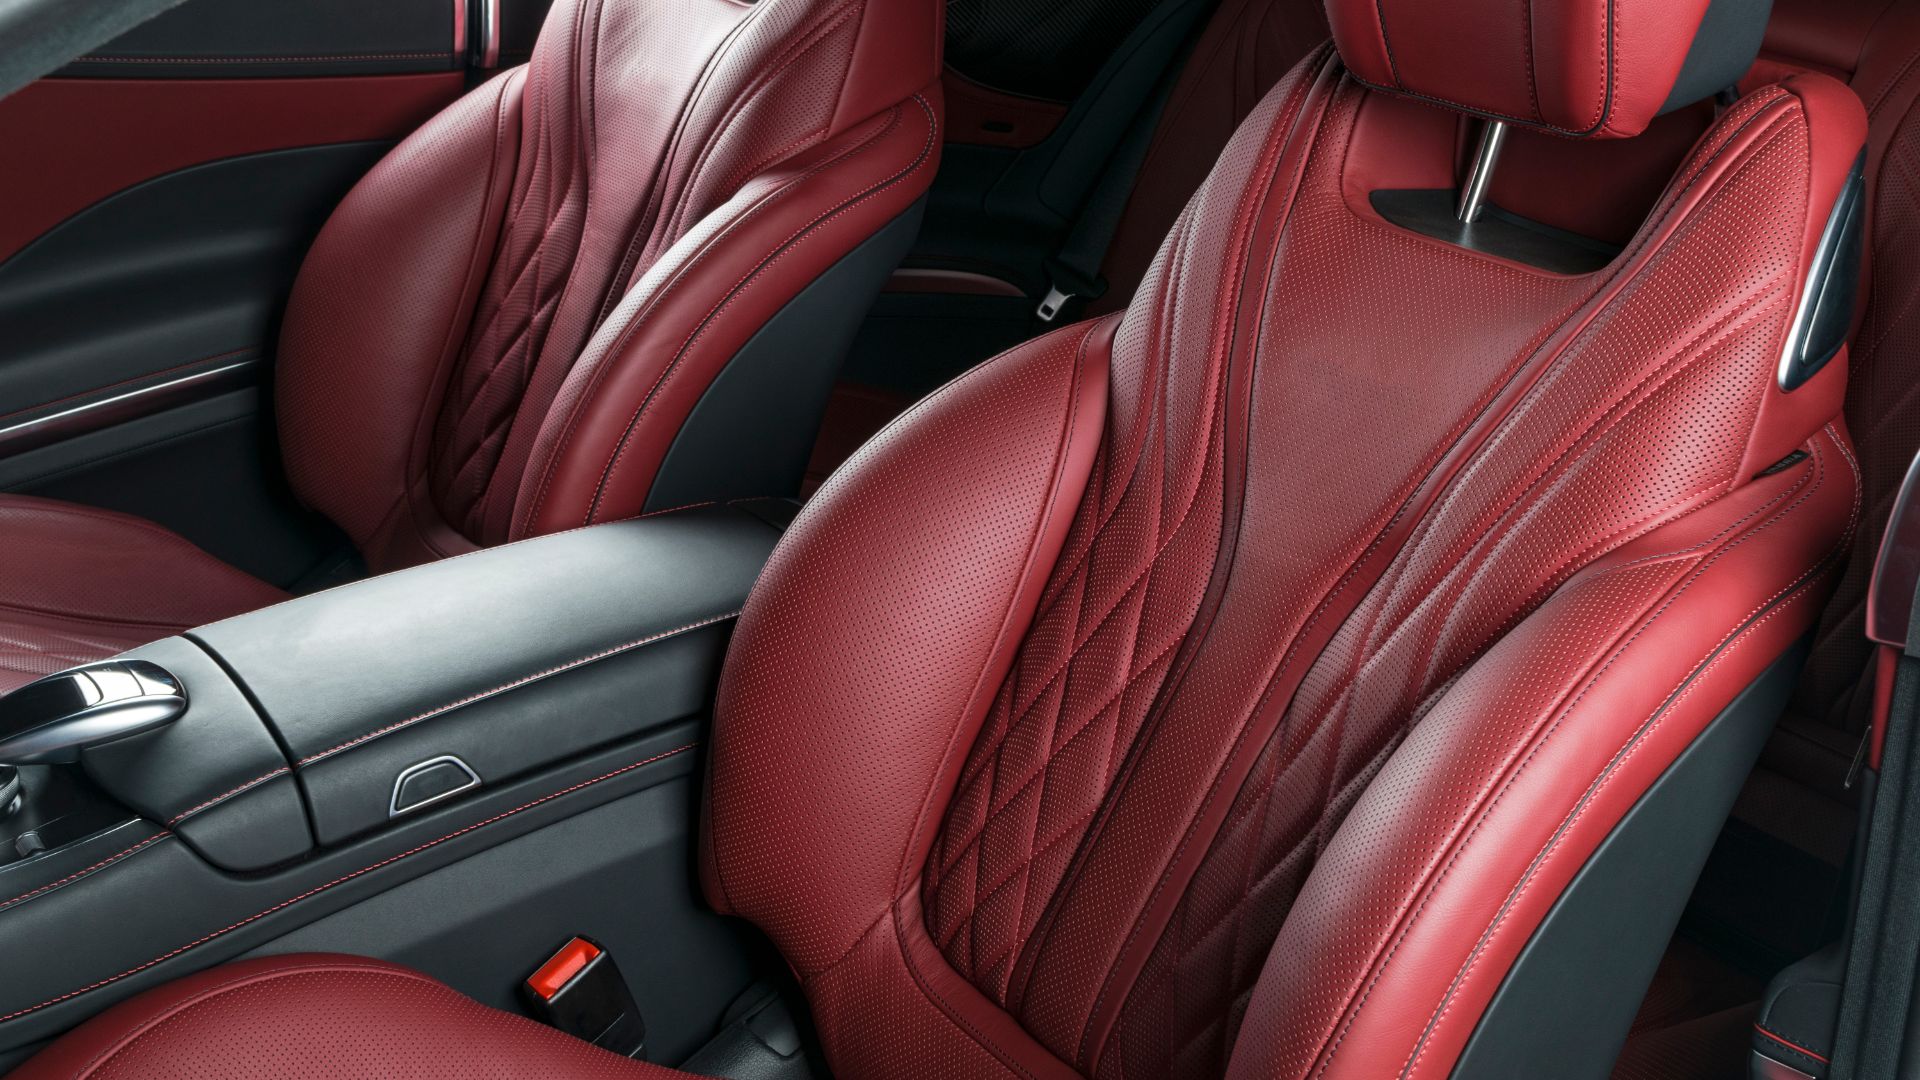 the interior of a car with red leather seats.